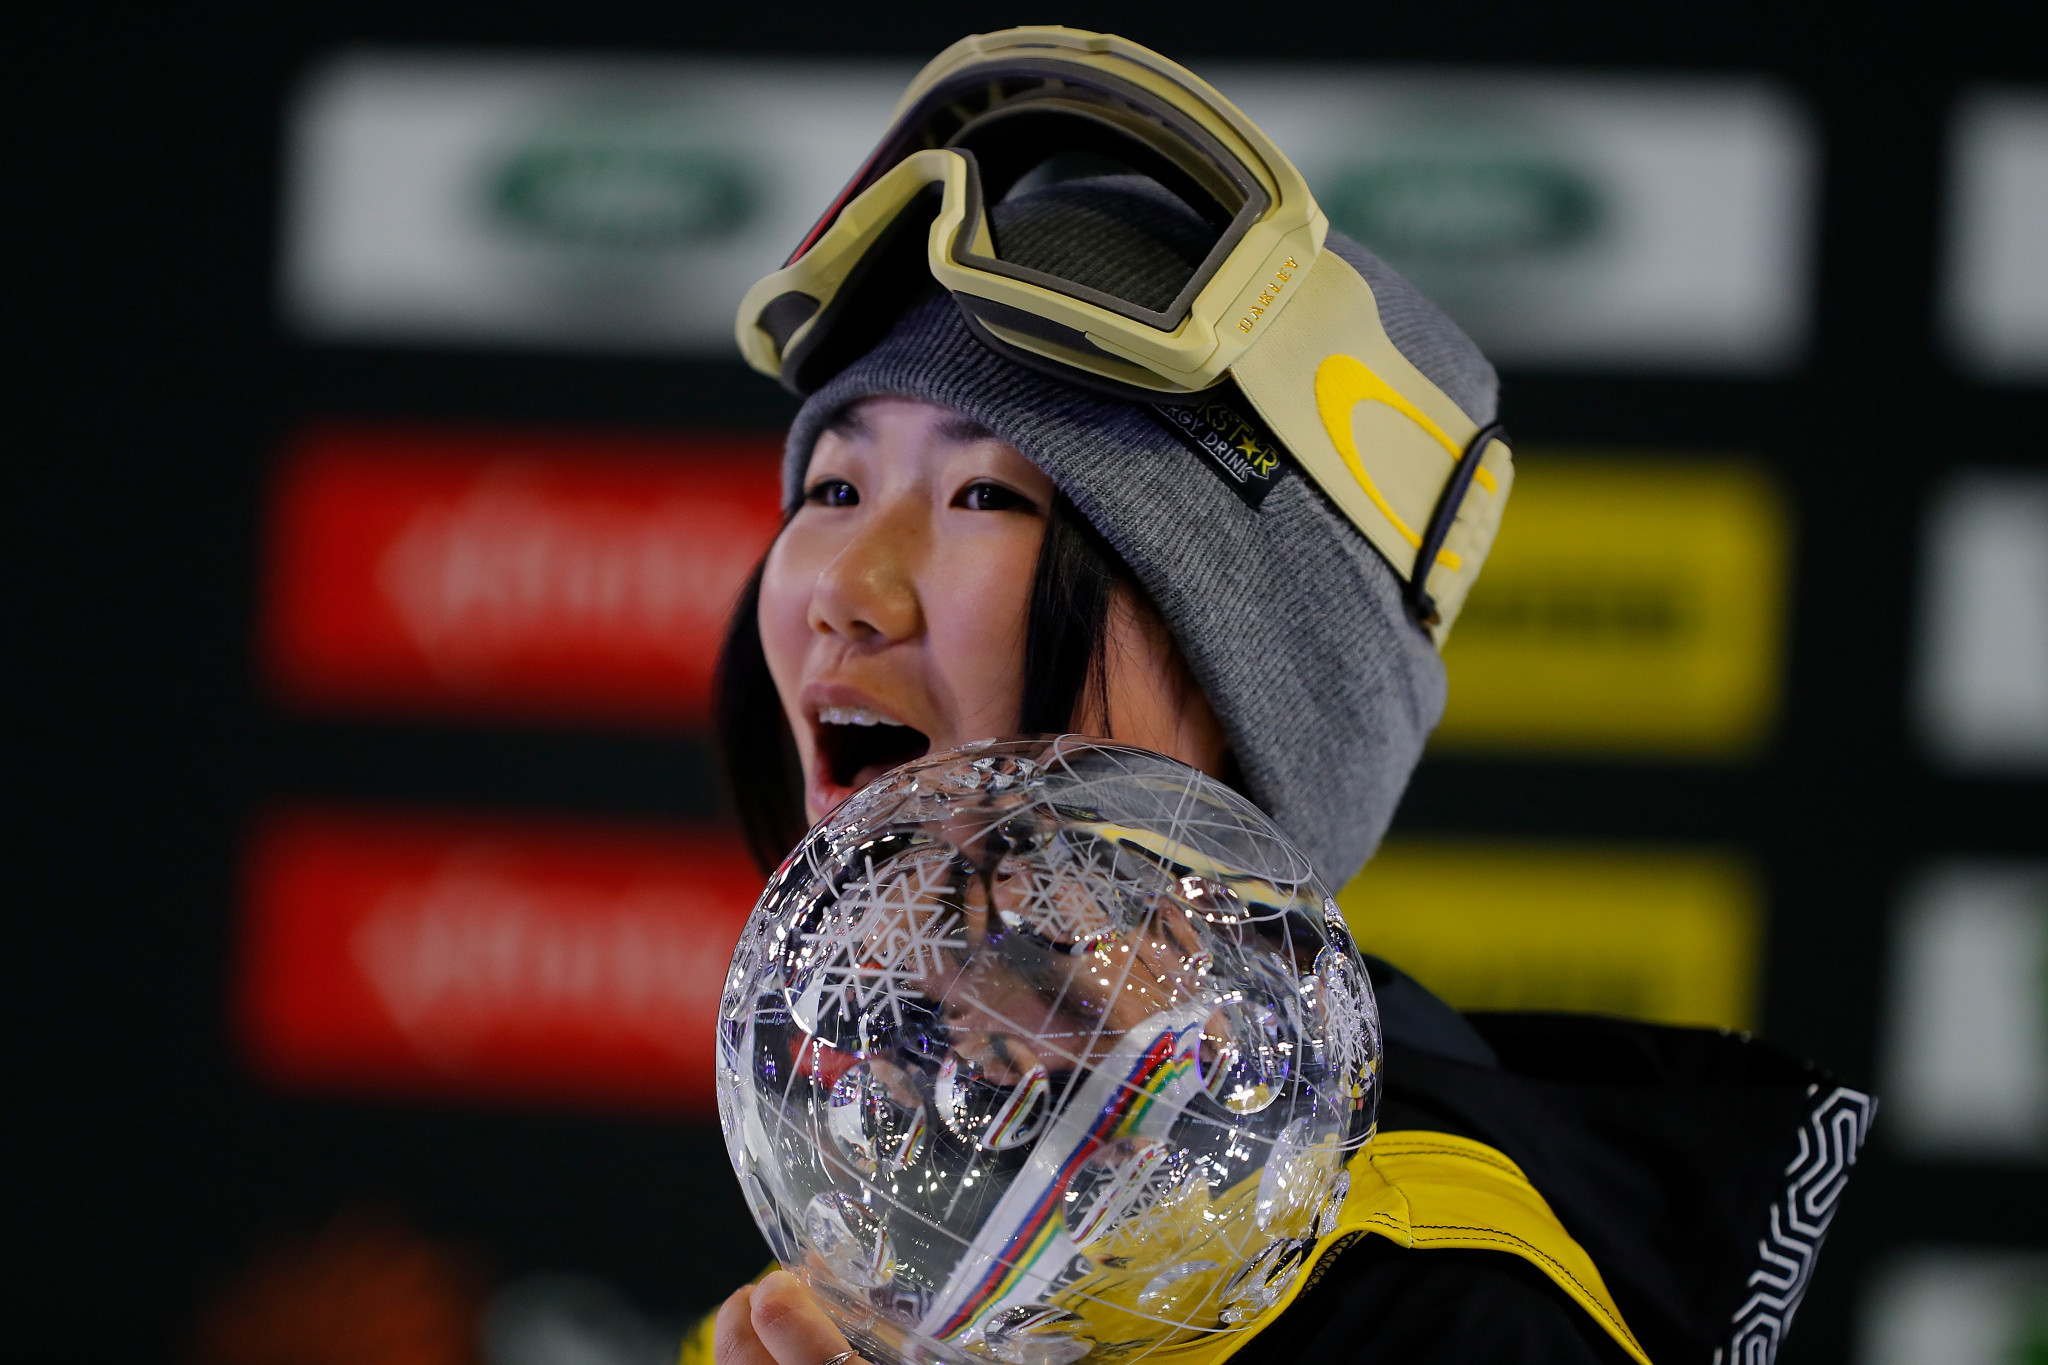 Reira Iwabuchi of Japan retained her FIS Snowboard Big Air World Cup title with a concluding win in Atlanta ©Getty Images